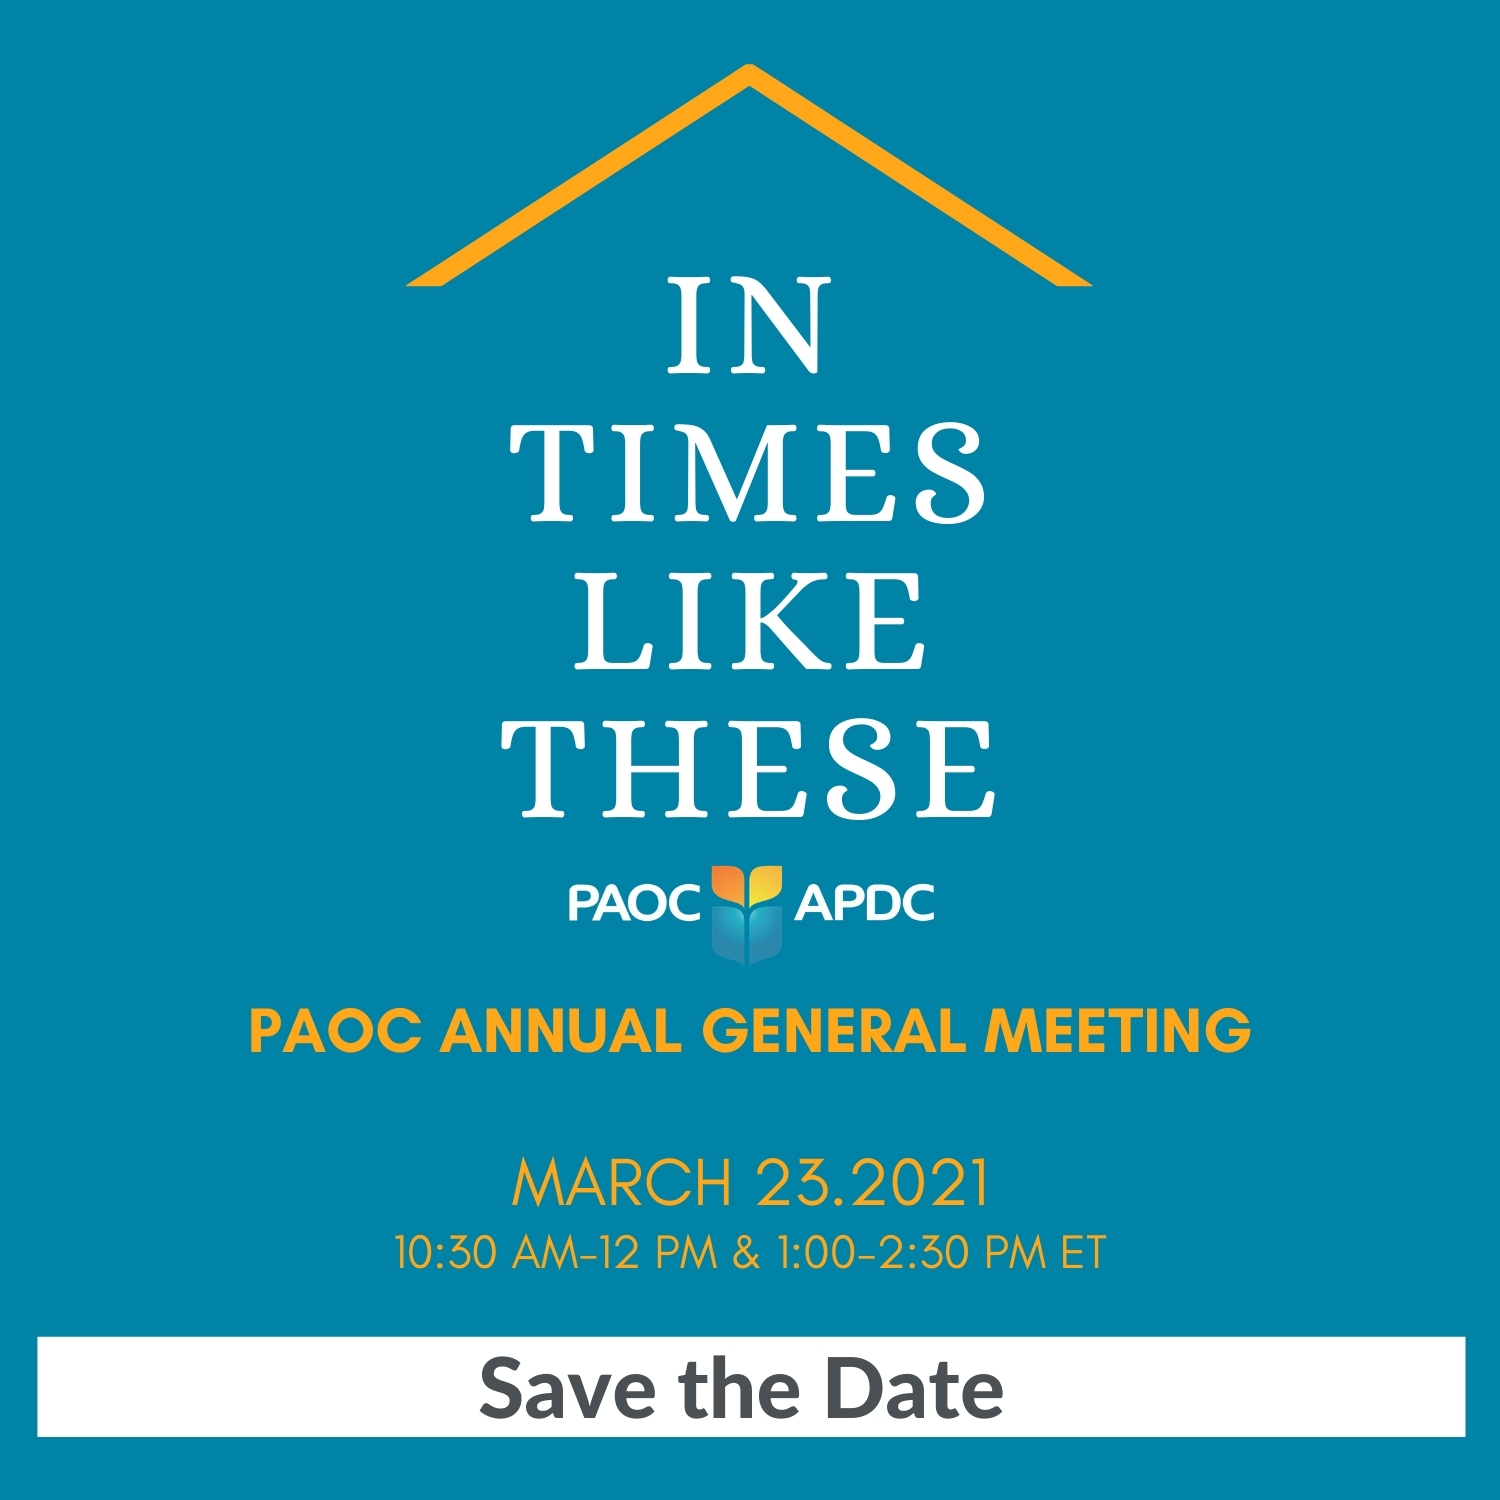 AGM 2021 Branding - In Times Like These - SAVE THE DATE